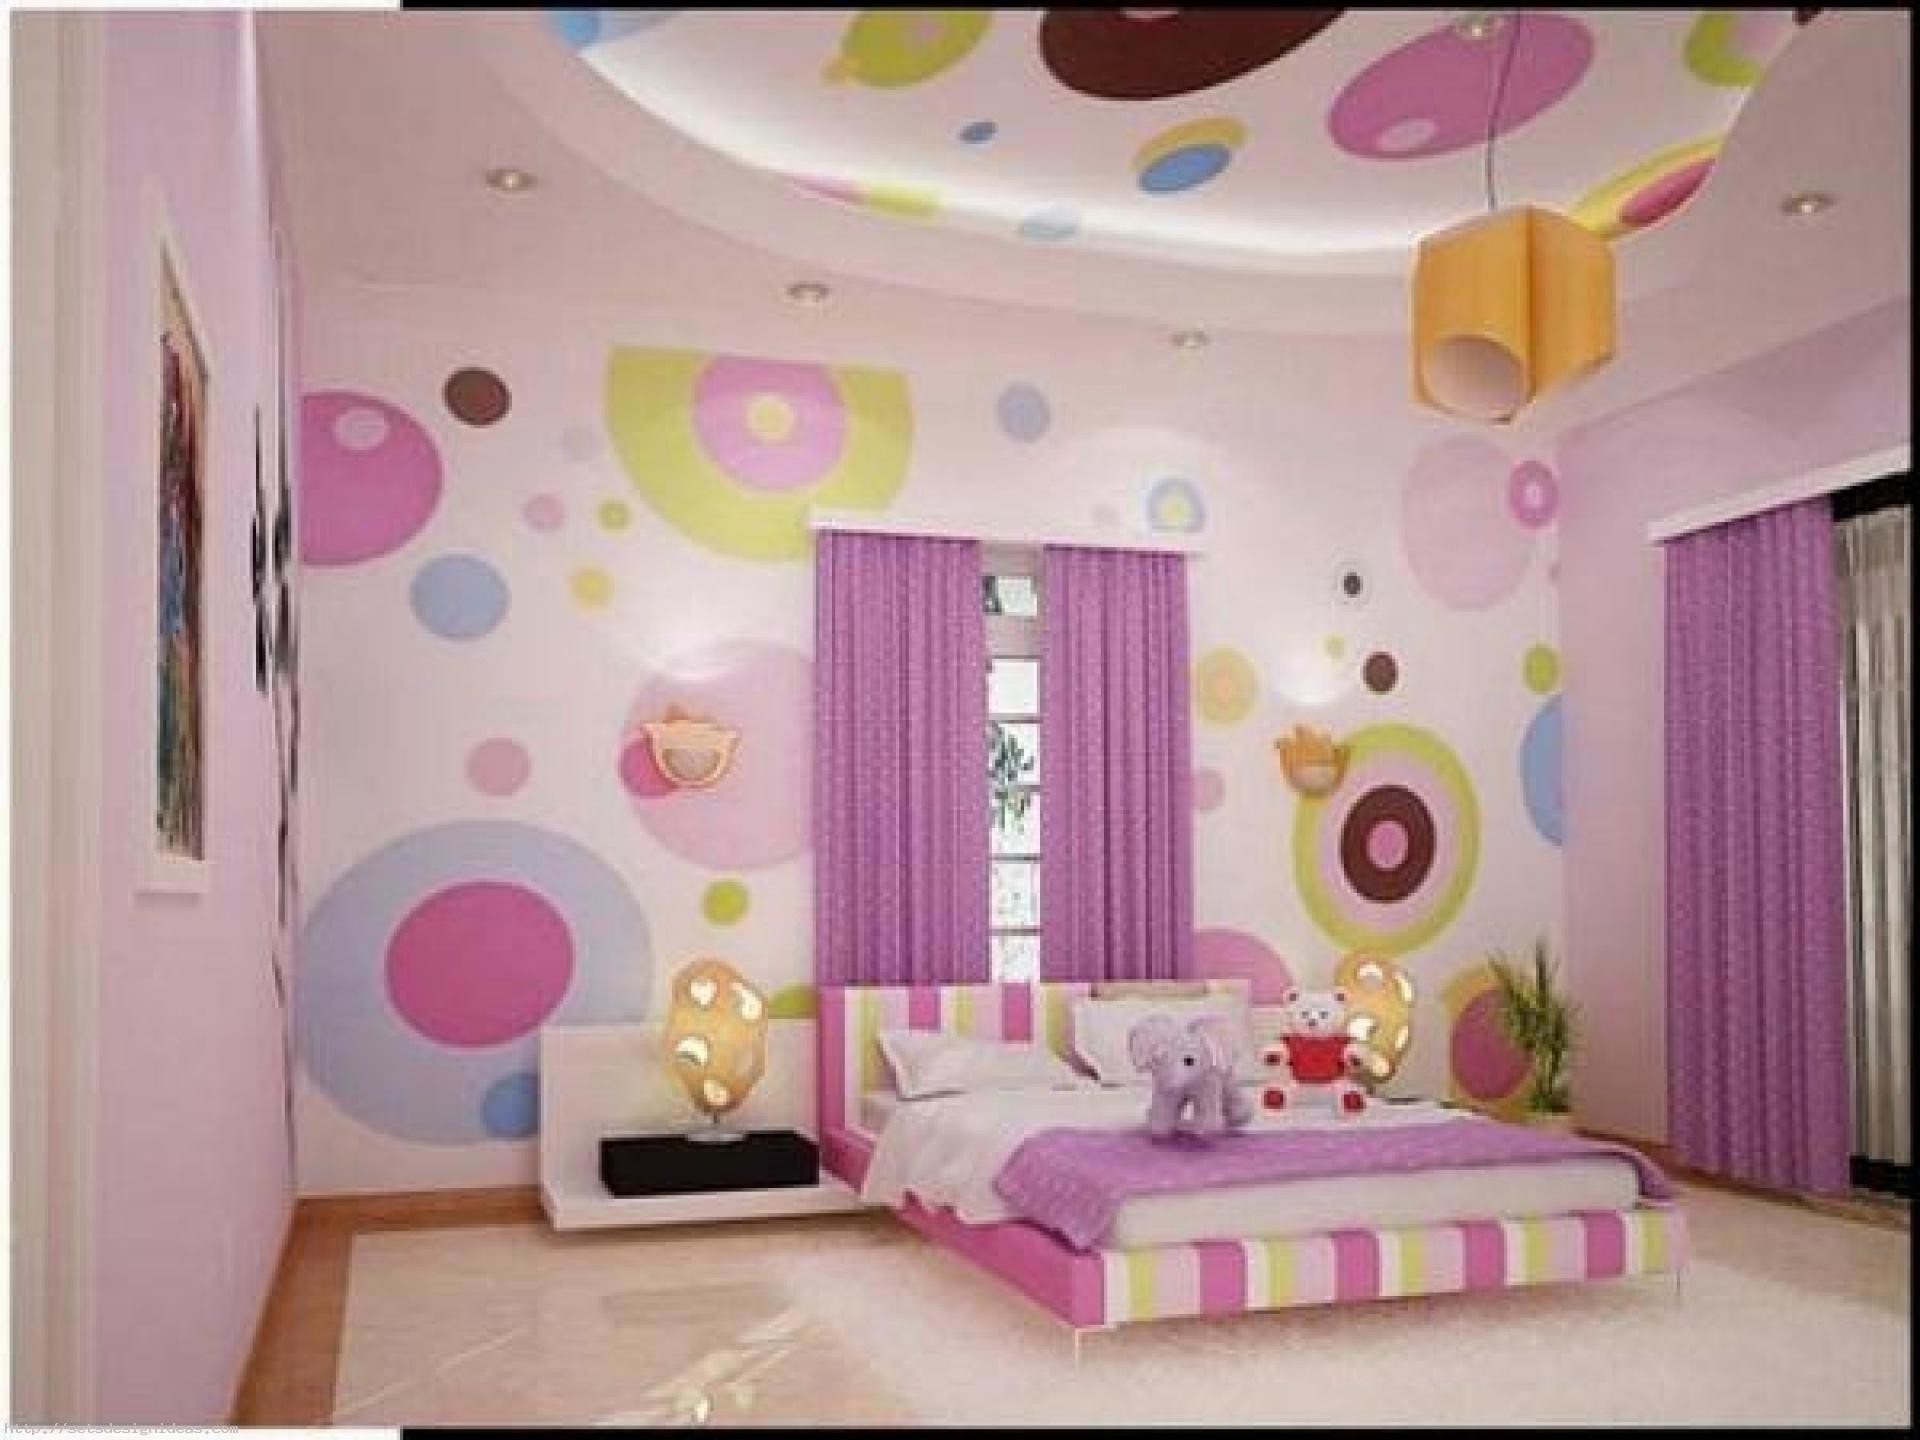 1920x1440 Fresh Room Design ideas for Pretentious and Stylish Teenage Girls. Girl  Rooms, Girls room decor, Girls Room Ideas for best result of Home Design